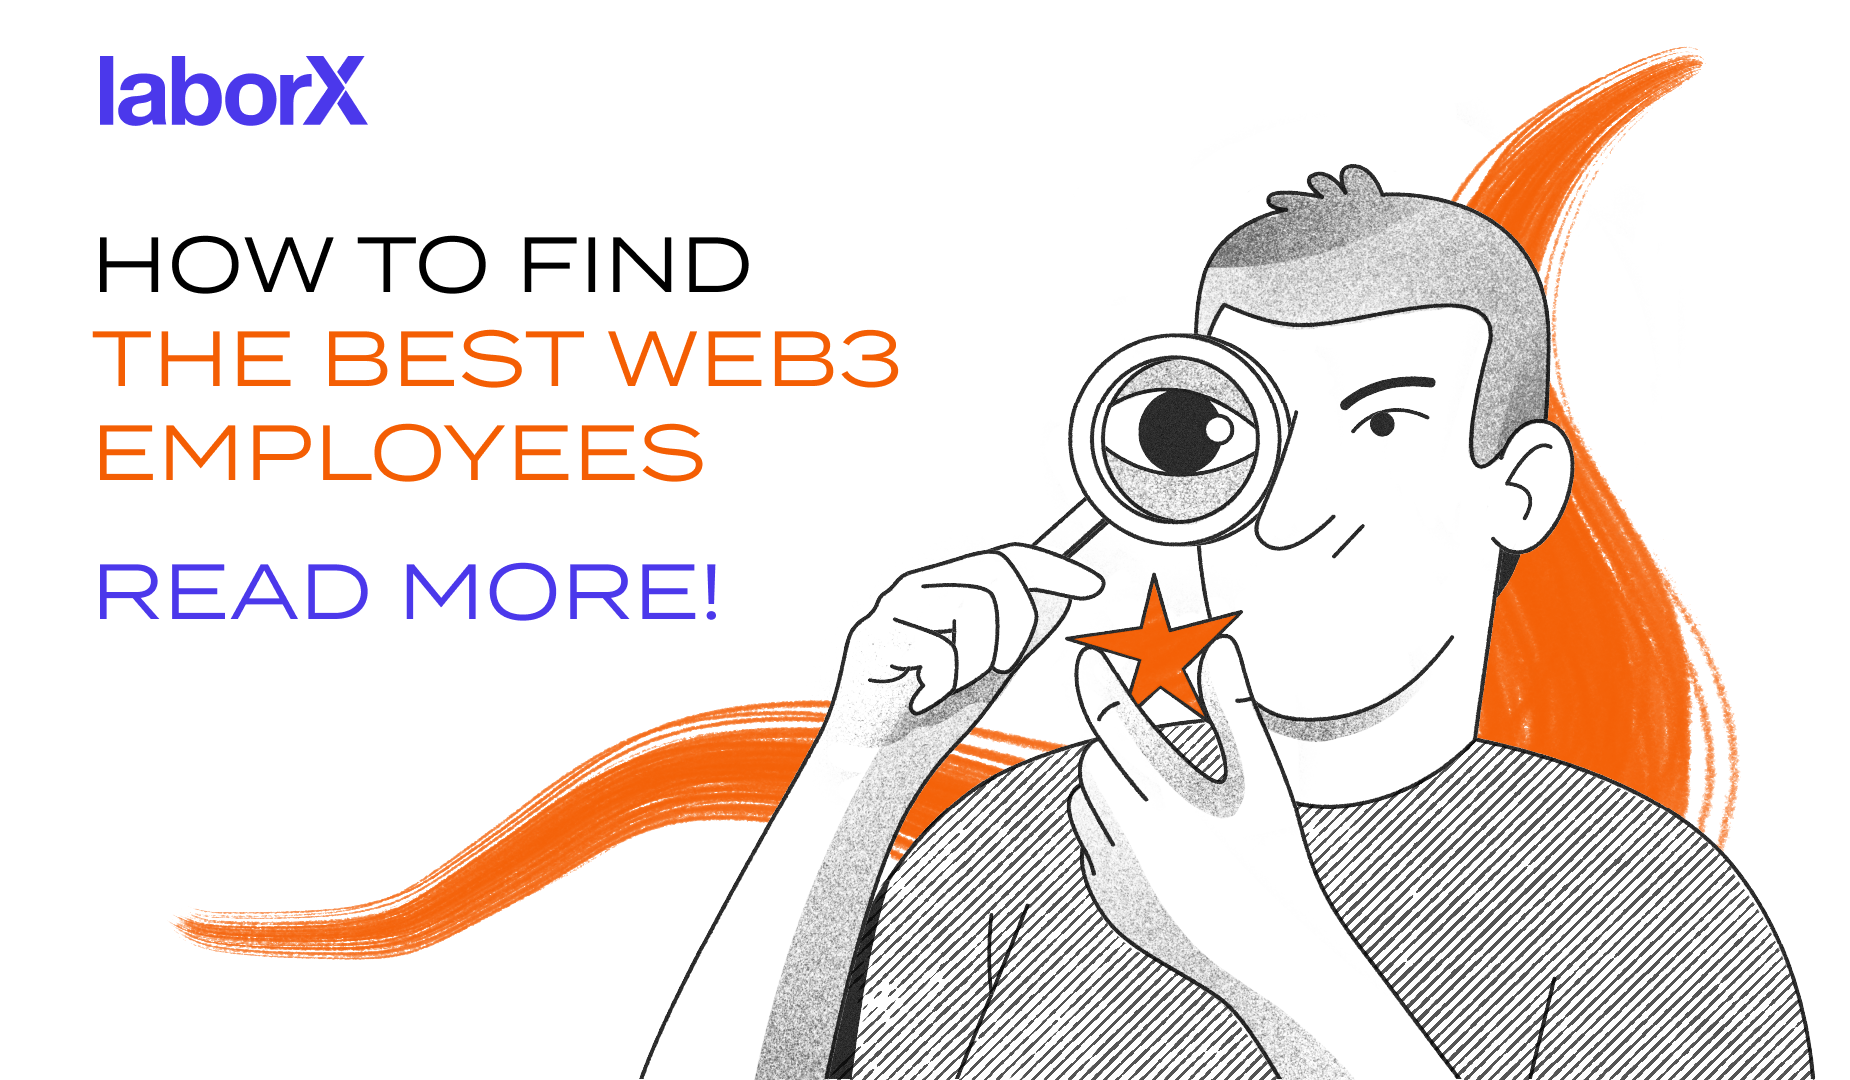 How To Find The Best Web3 Employees